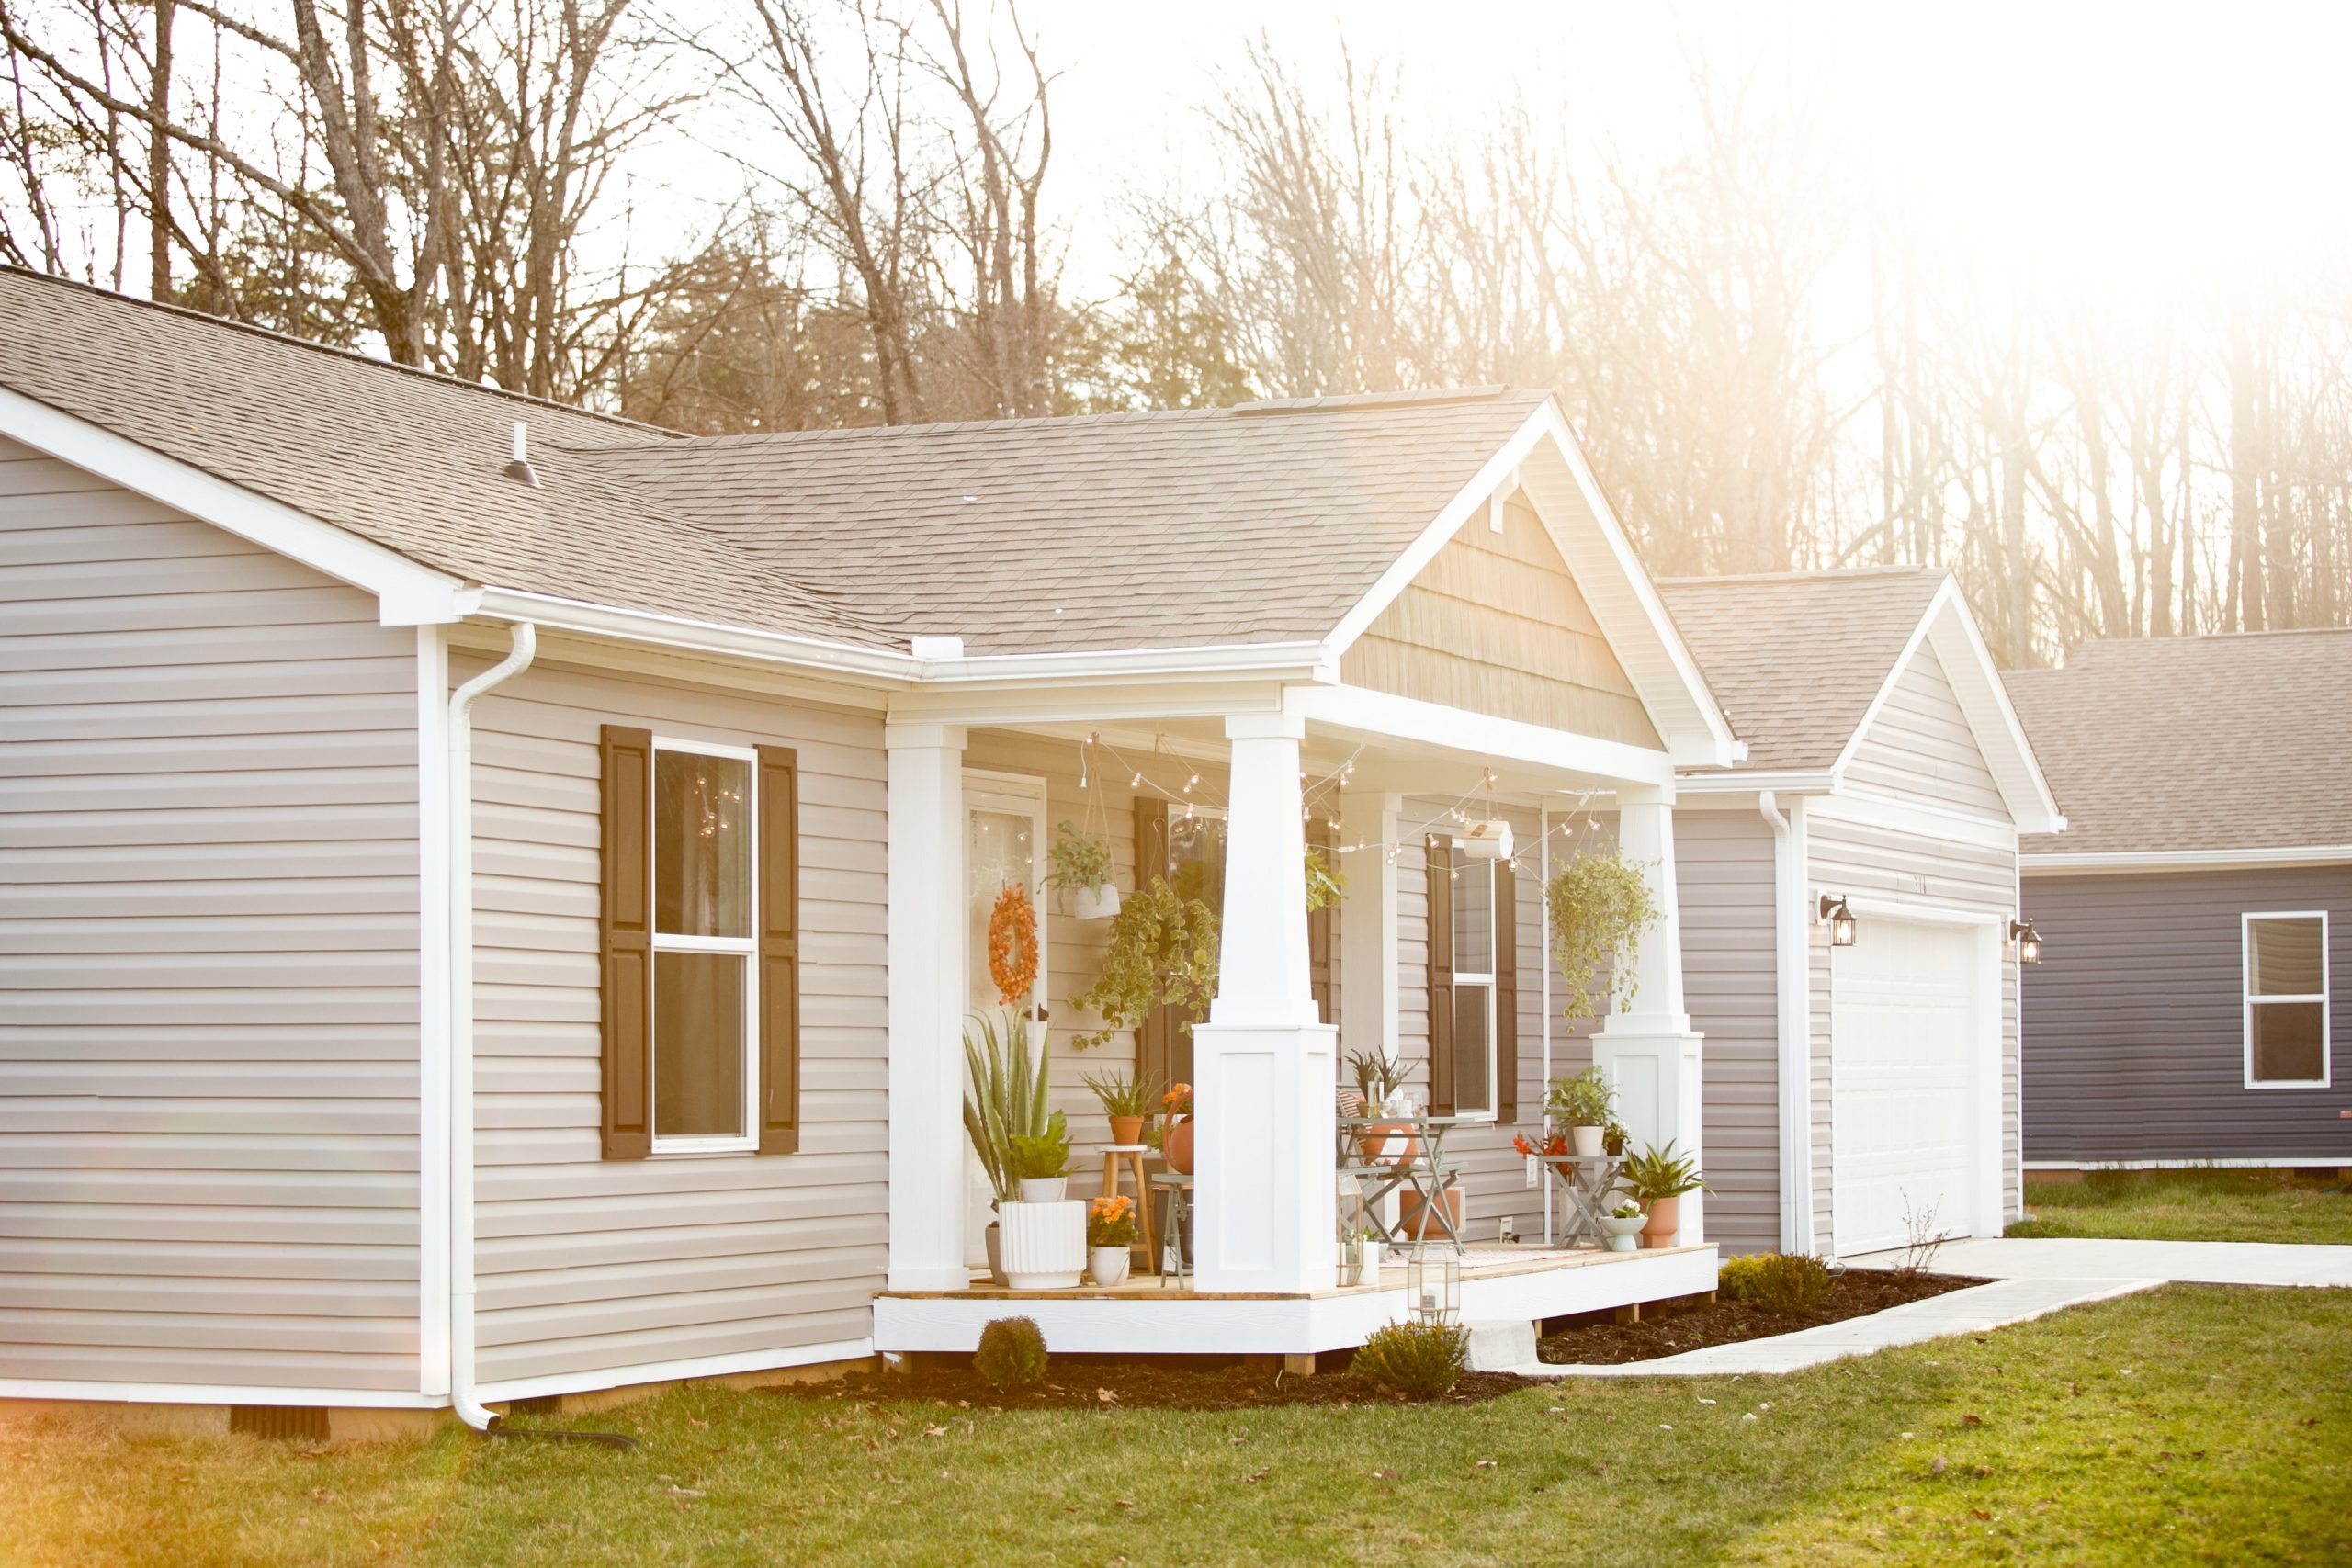 7 Characteristics of A Mobile Home